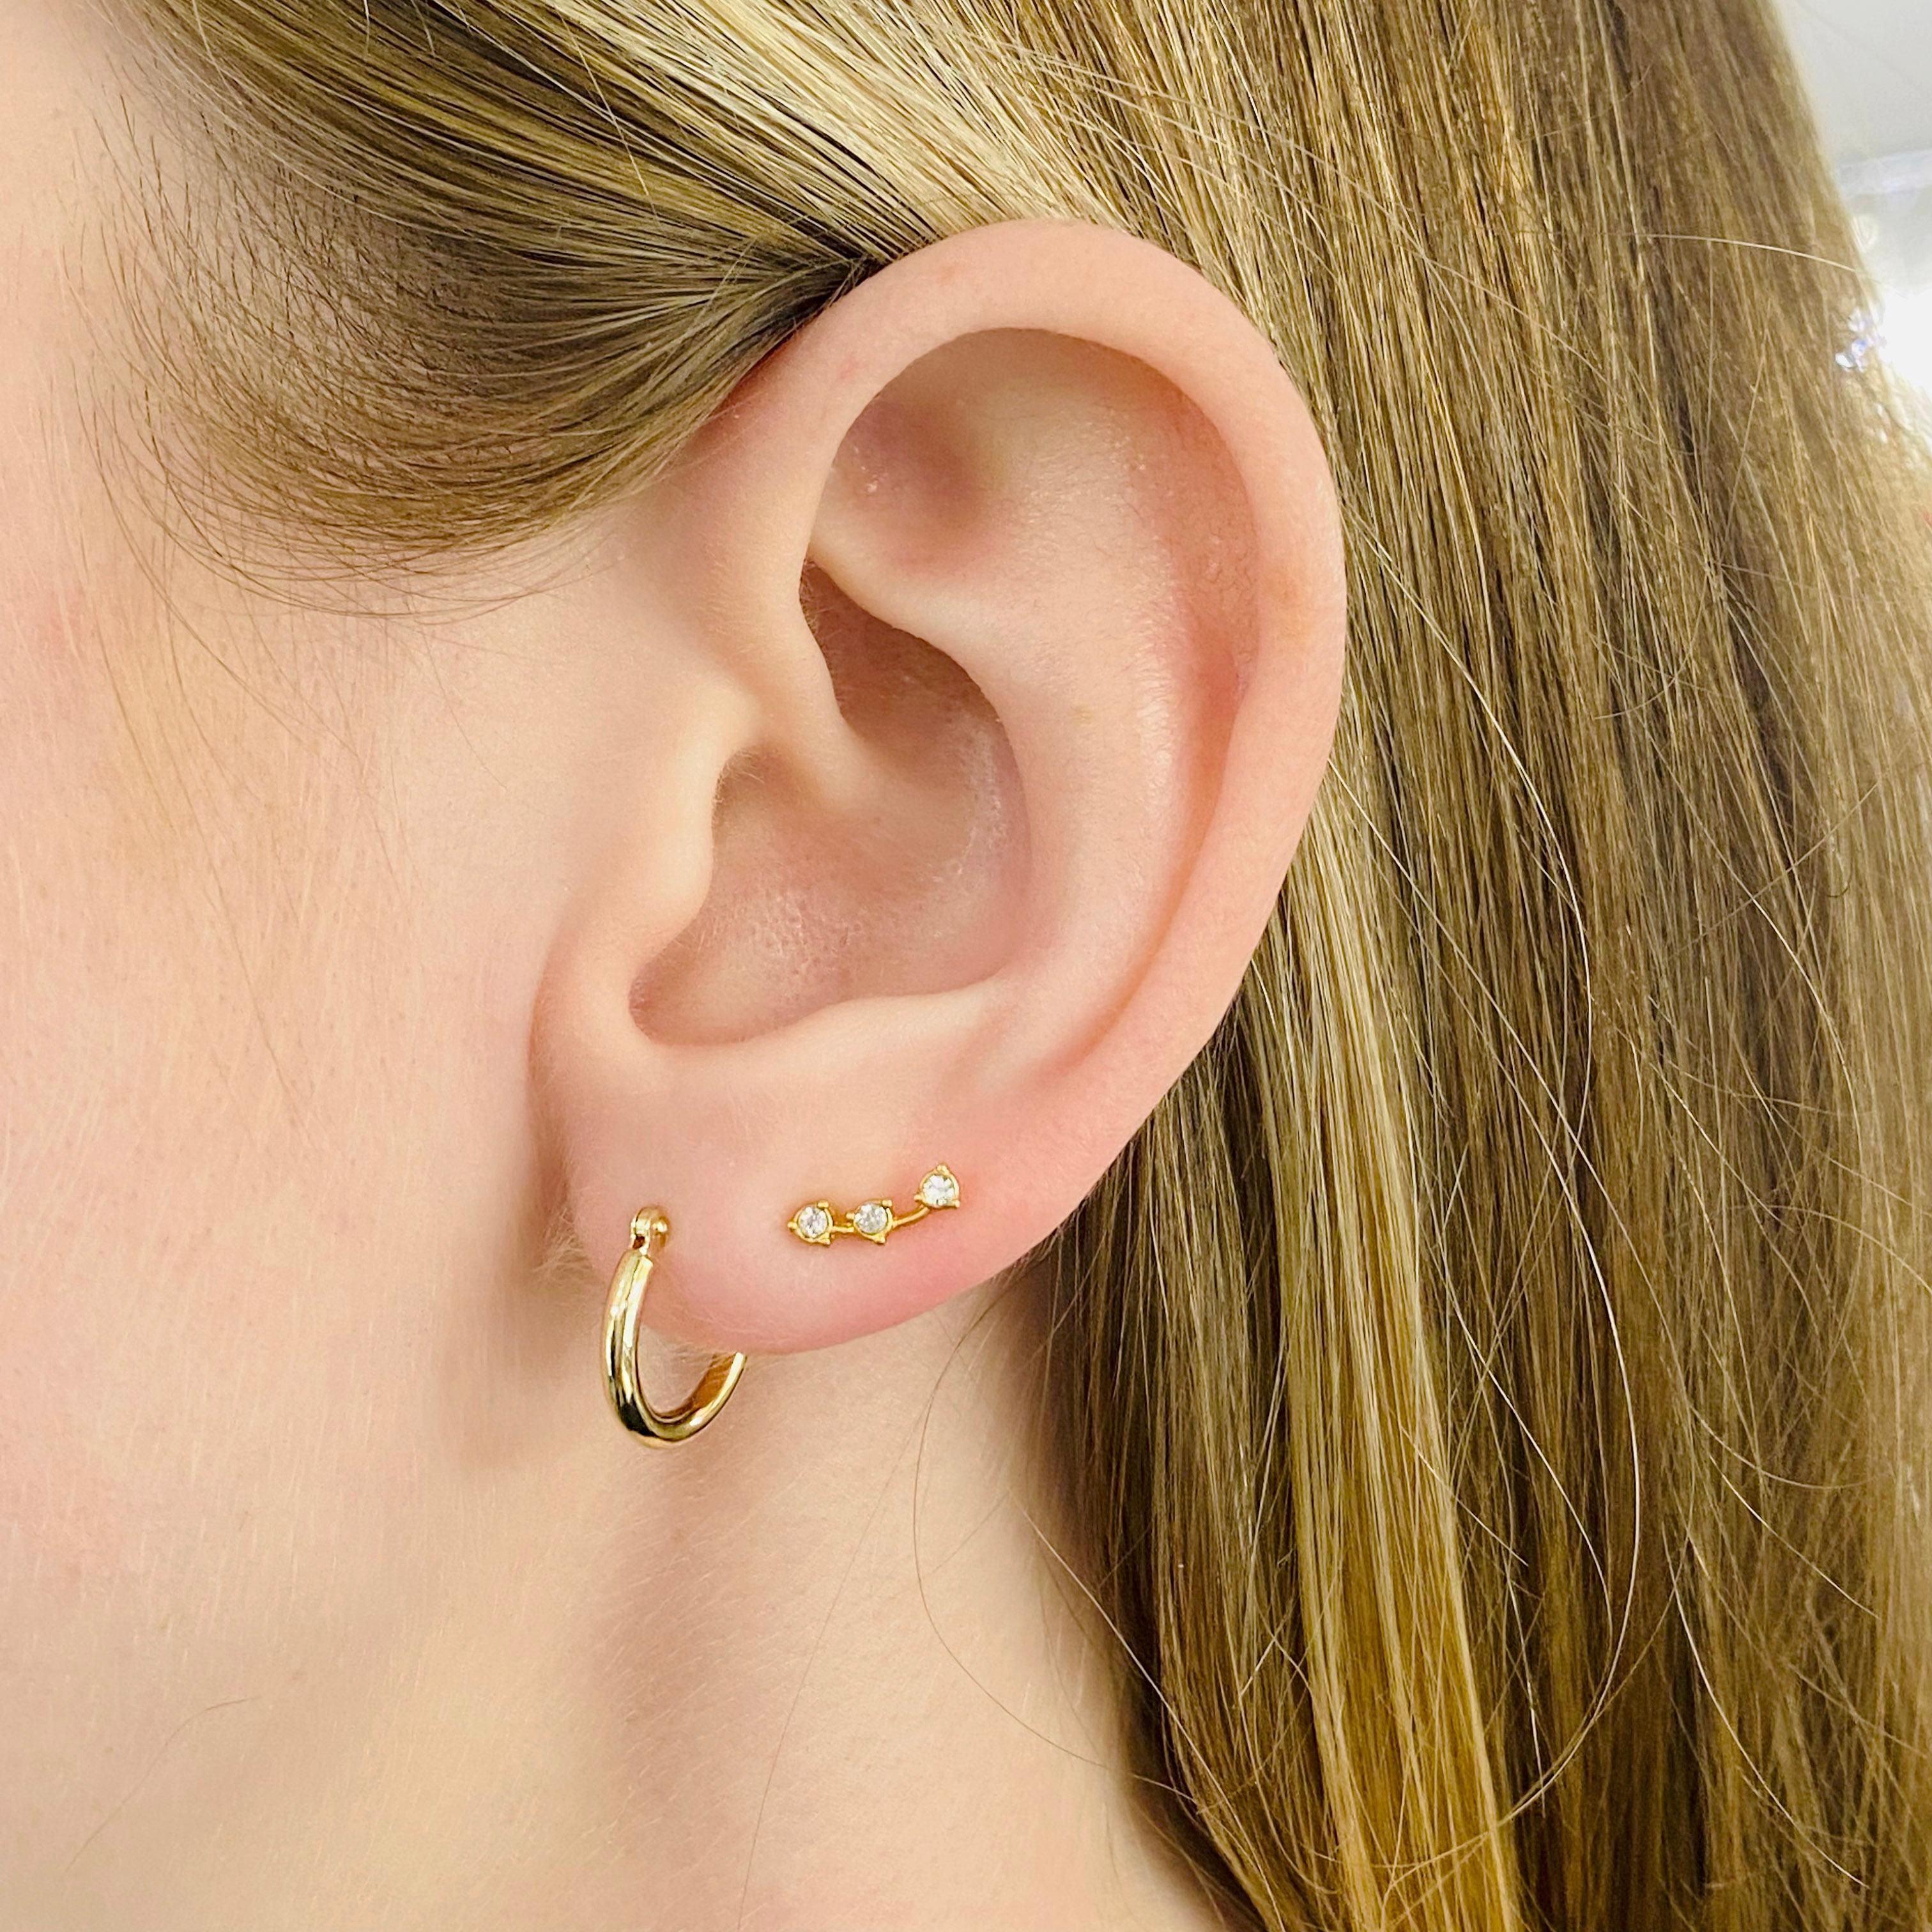 These 14 karat yellow gold hoops are perfect for everyday wear! They are made of hollow gold so that they will be light on your ears and not pull down your earlobes. We have seen many people who have their earlobes rip because they are wearing too